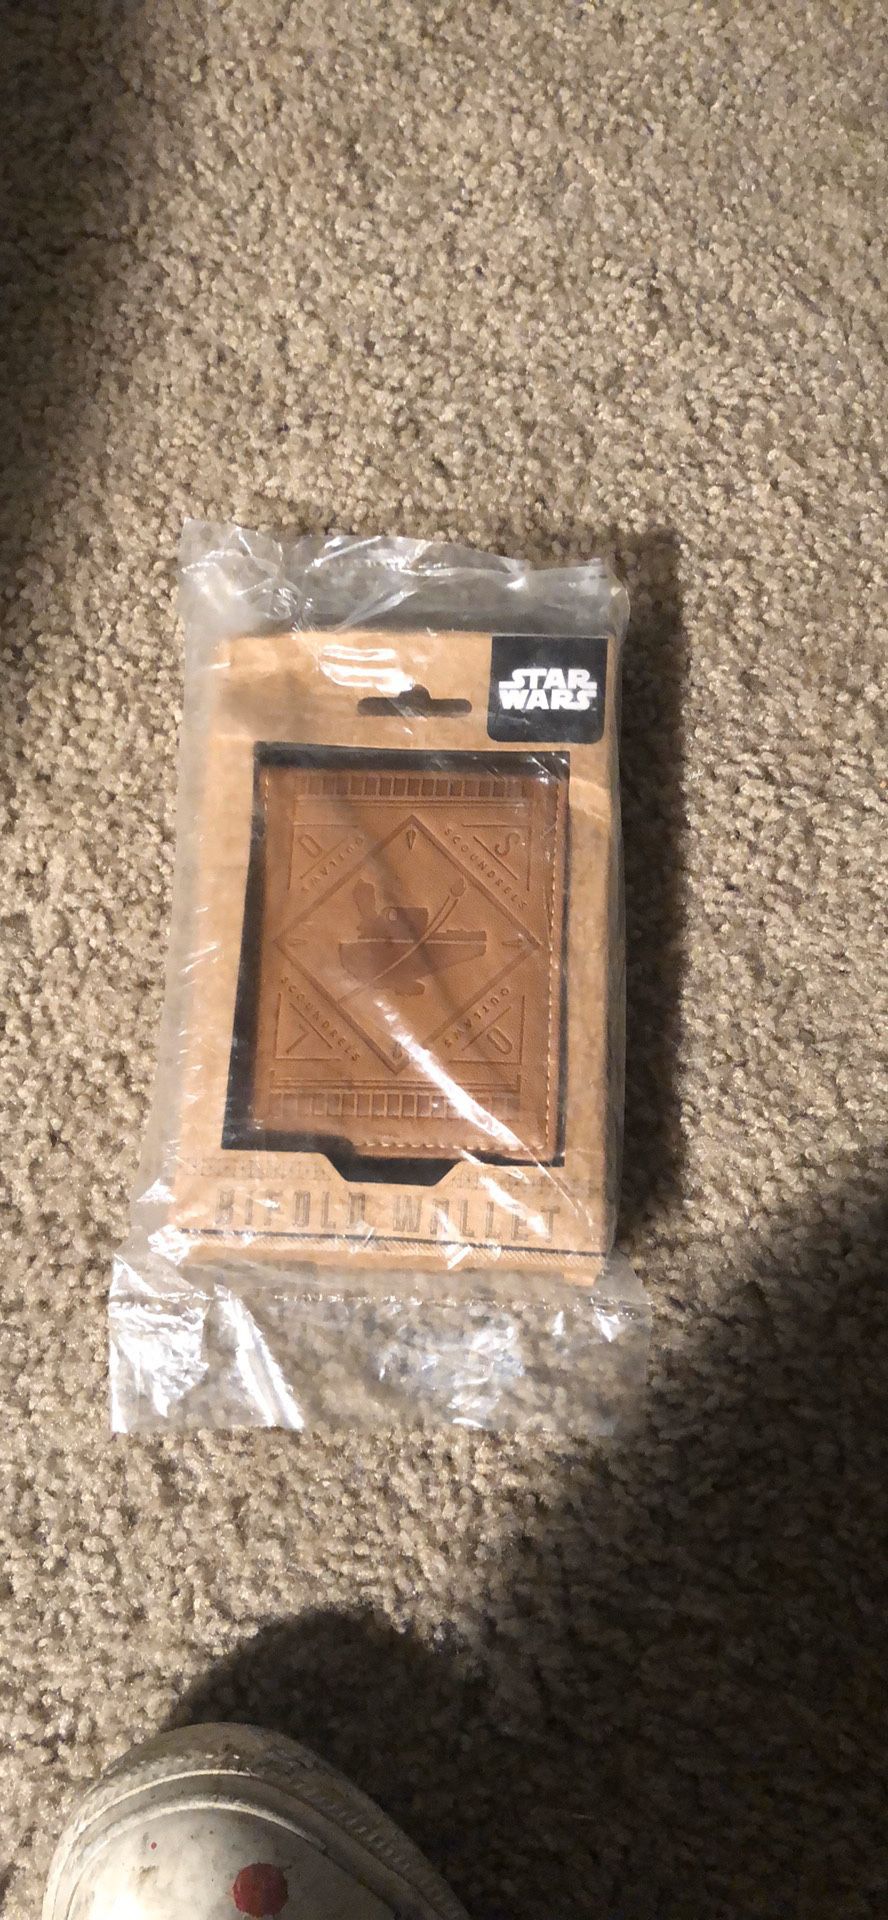 Star Wars brown leather bifold wallet sealed brand new gift box